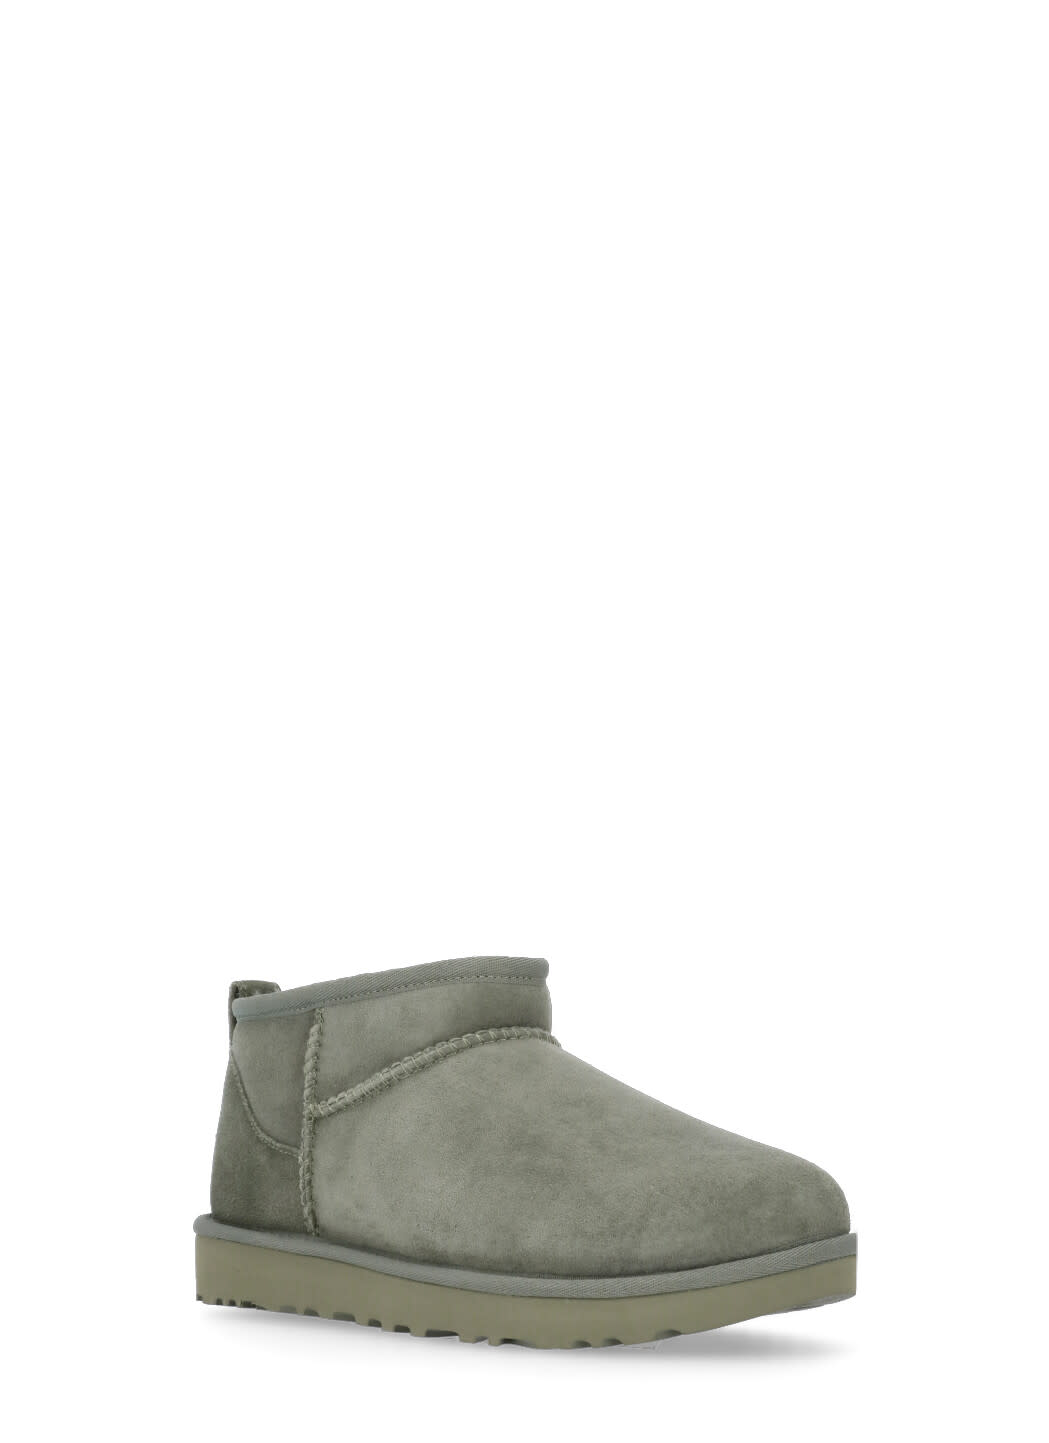 Shop Ugg Classic Ultra Mini Ankle Boots In Green